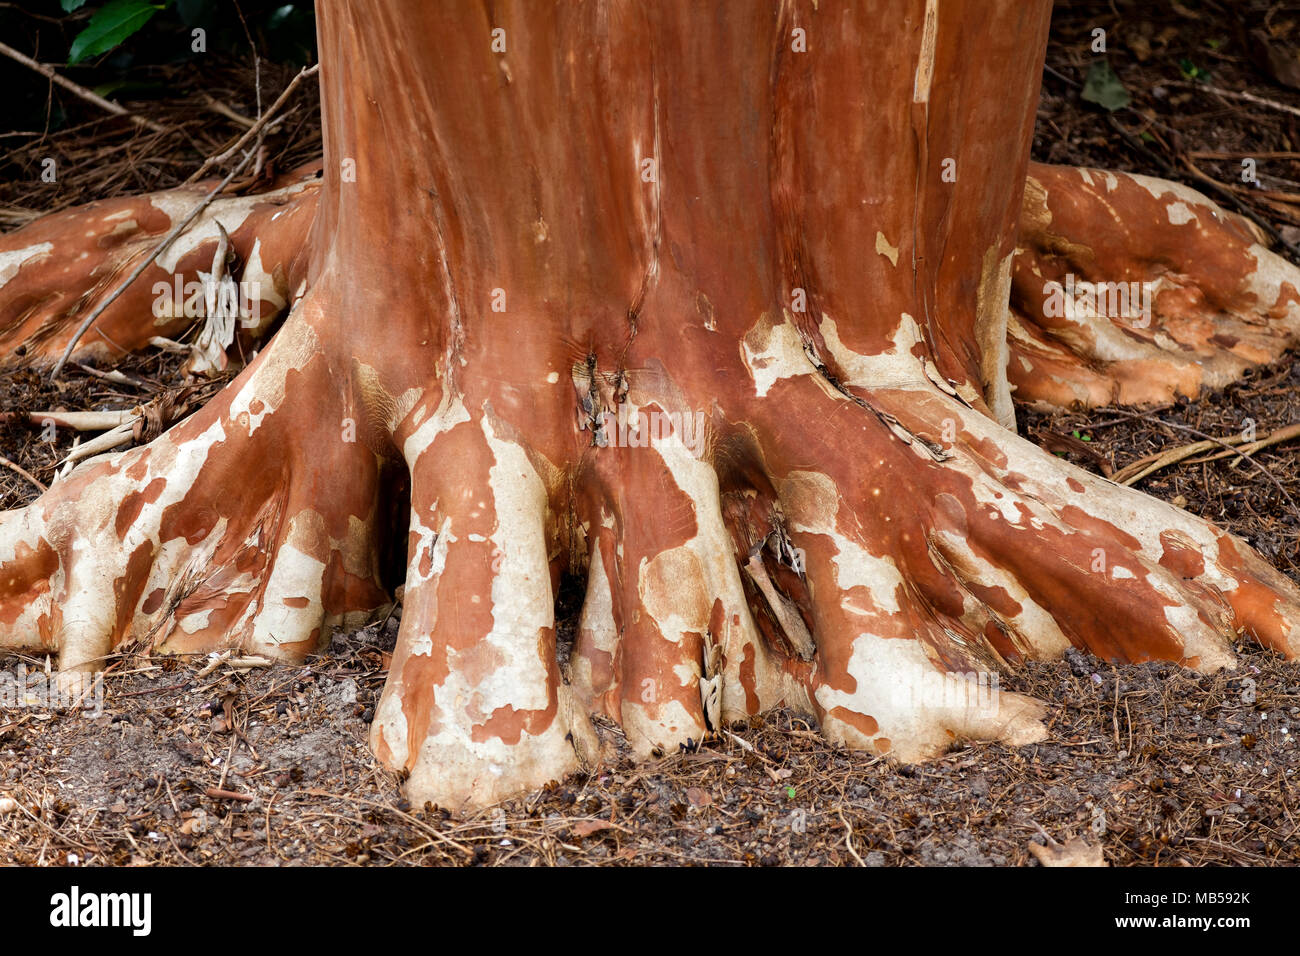 Reddish orange crepe myrtle trunk and roots in early spring. Stock Photo